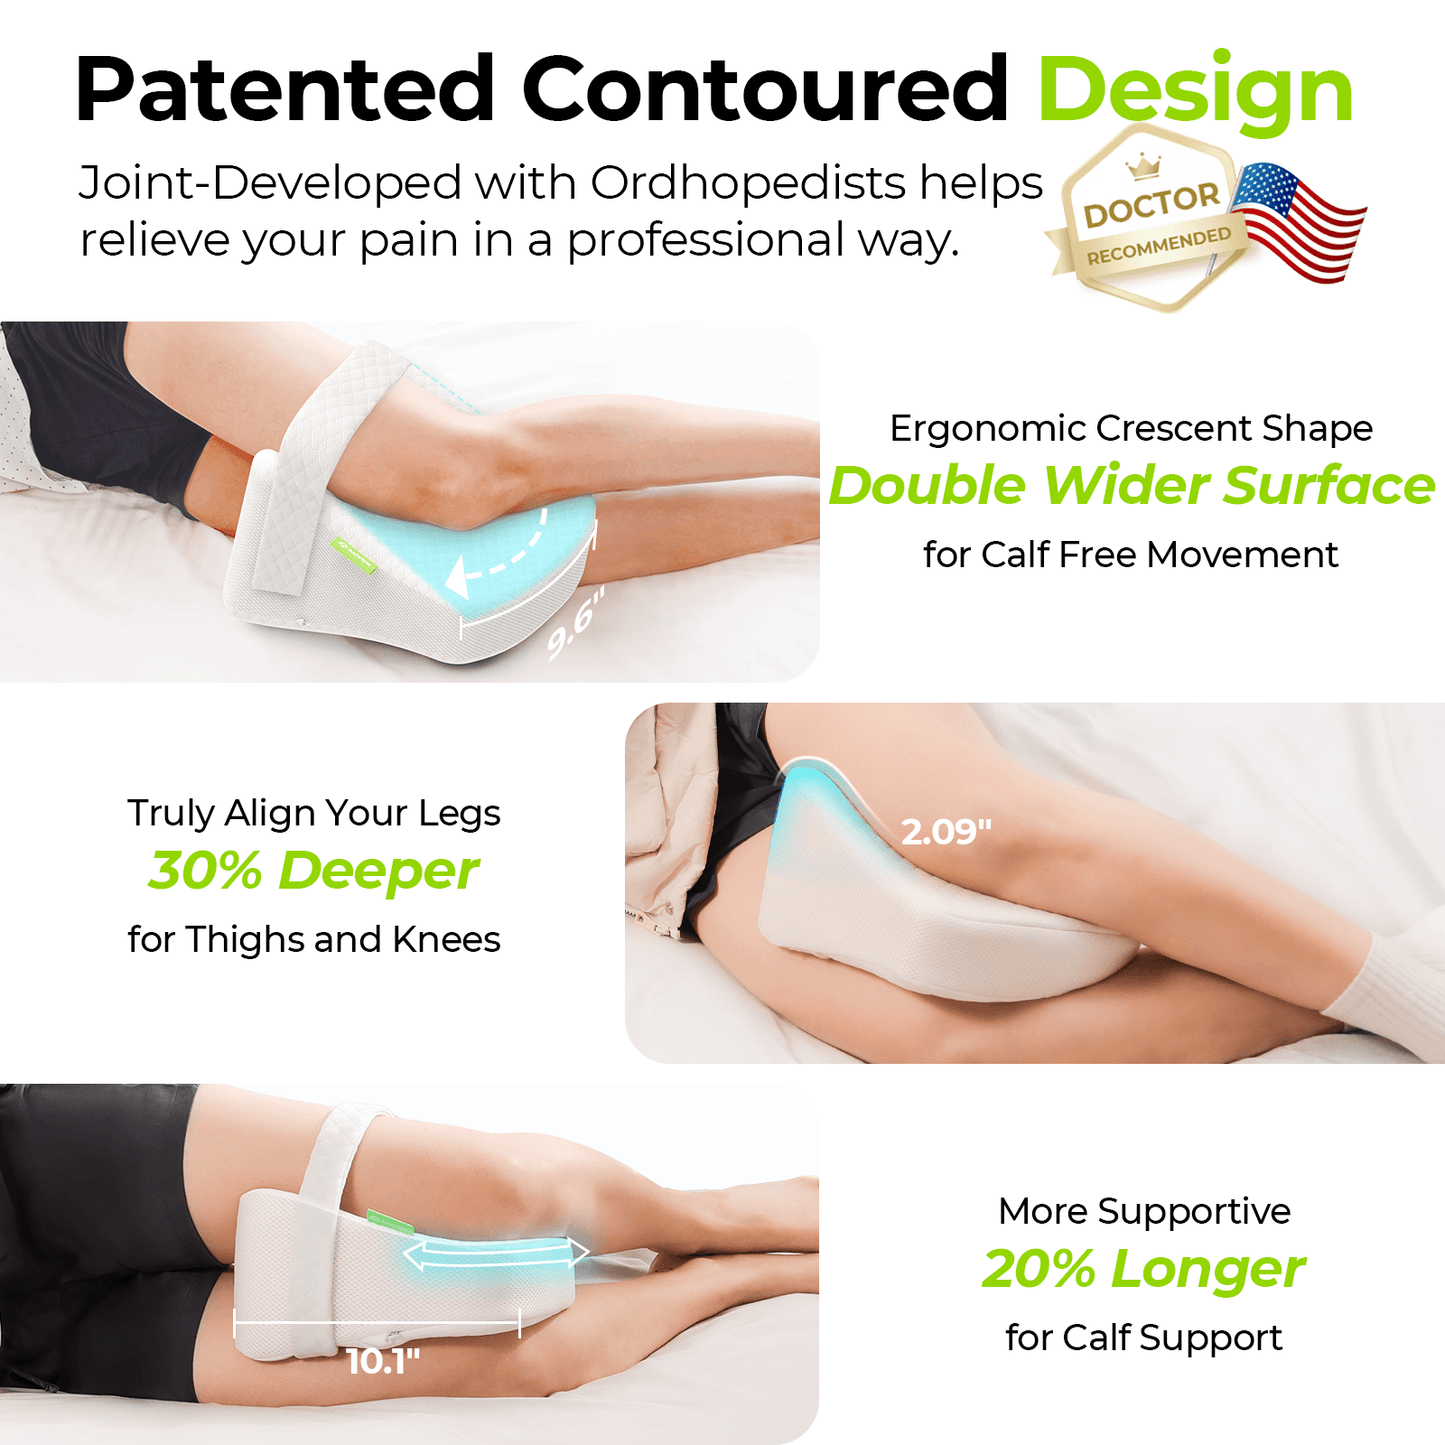 AUVON Contoured Knee Pillow for Side Sleepers Joint-developed with Physicians, Cooling Memory Foam Between Leg Pillow with Adjustable Strap for Spine Alignment, Pain Relief for Back, Hips, Knee Joints - AUVON